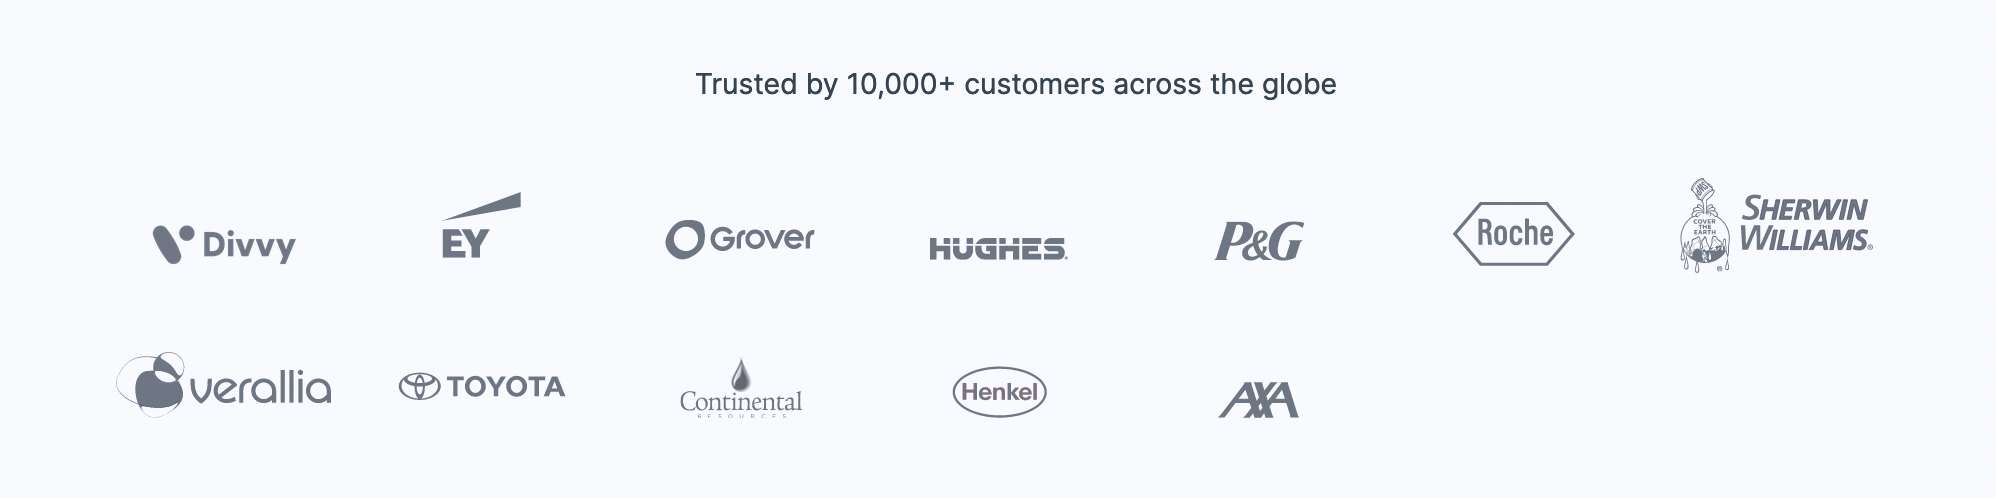 Nanonets trusted by 1000+ customers